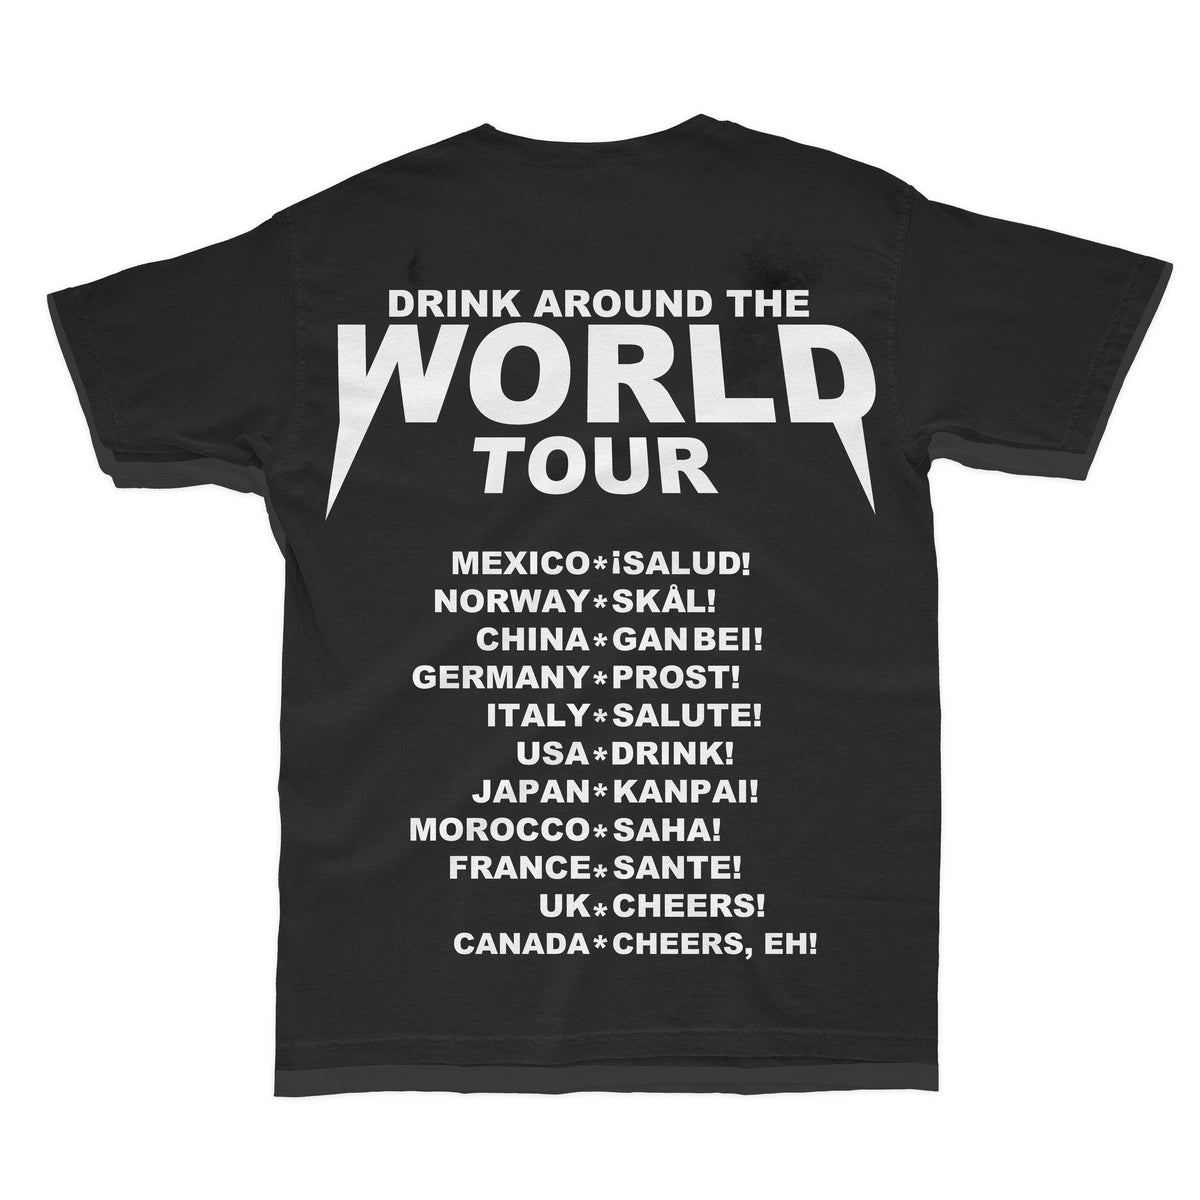 The Lost Bros Drink Around the World Tour Tee - Black